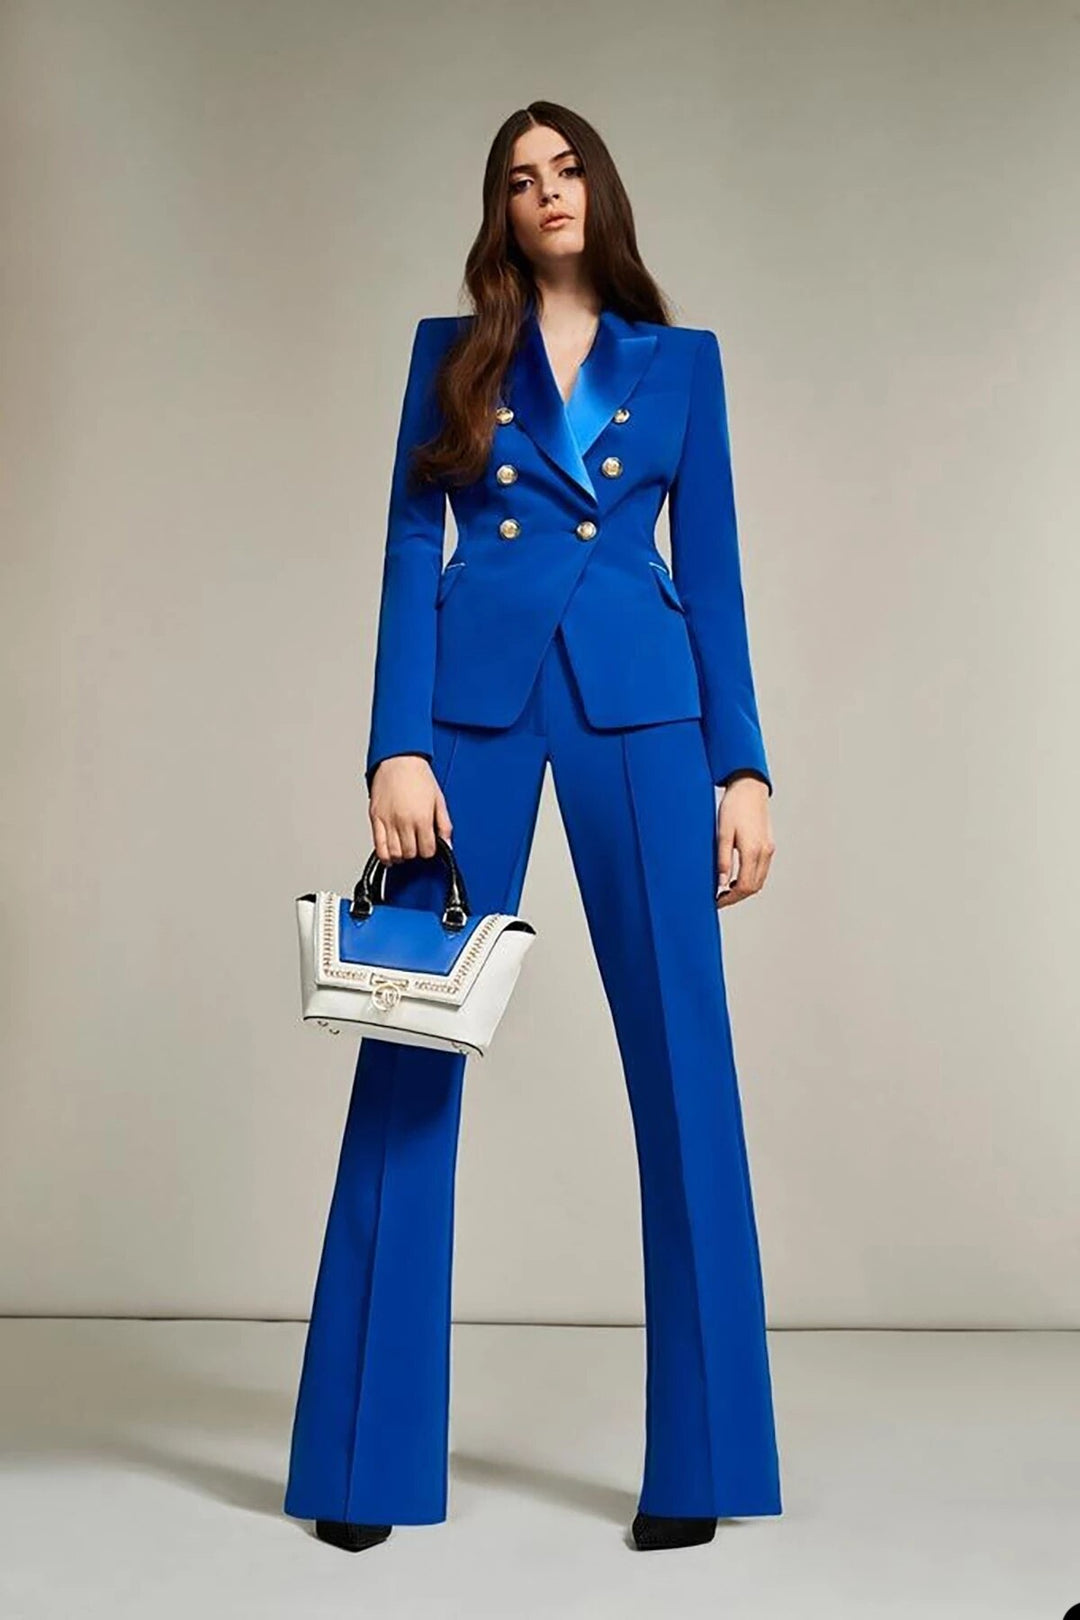 Miranda Royal Blue Double-Breasted Women Flared Pants Suit - ENE TRENDS -custom designed-personalized- tailored-suits-near me-shirt-clothes-dress-amazon-top-luxury-fashion-men-women-kids-streetwear-IG-best